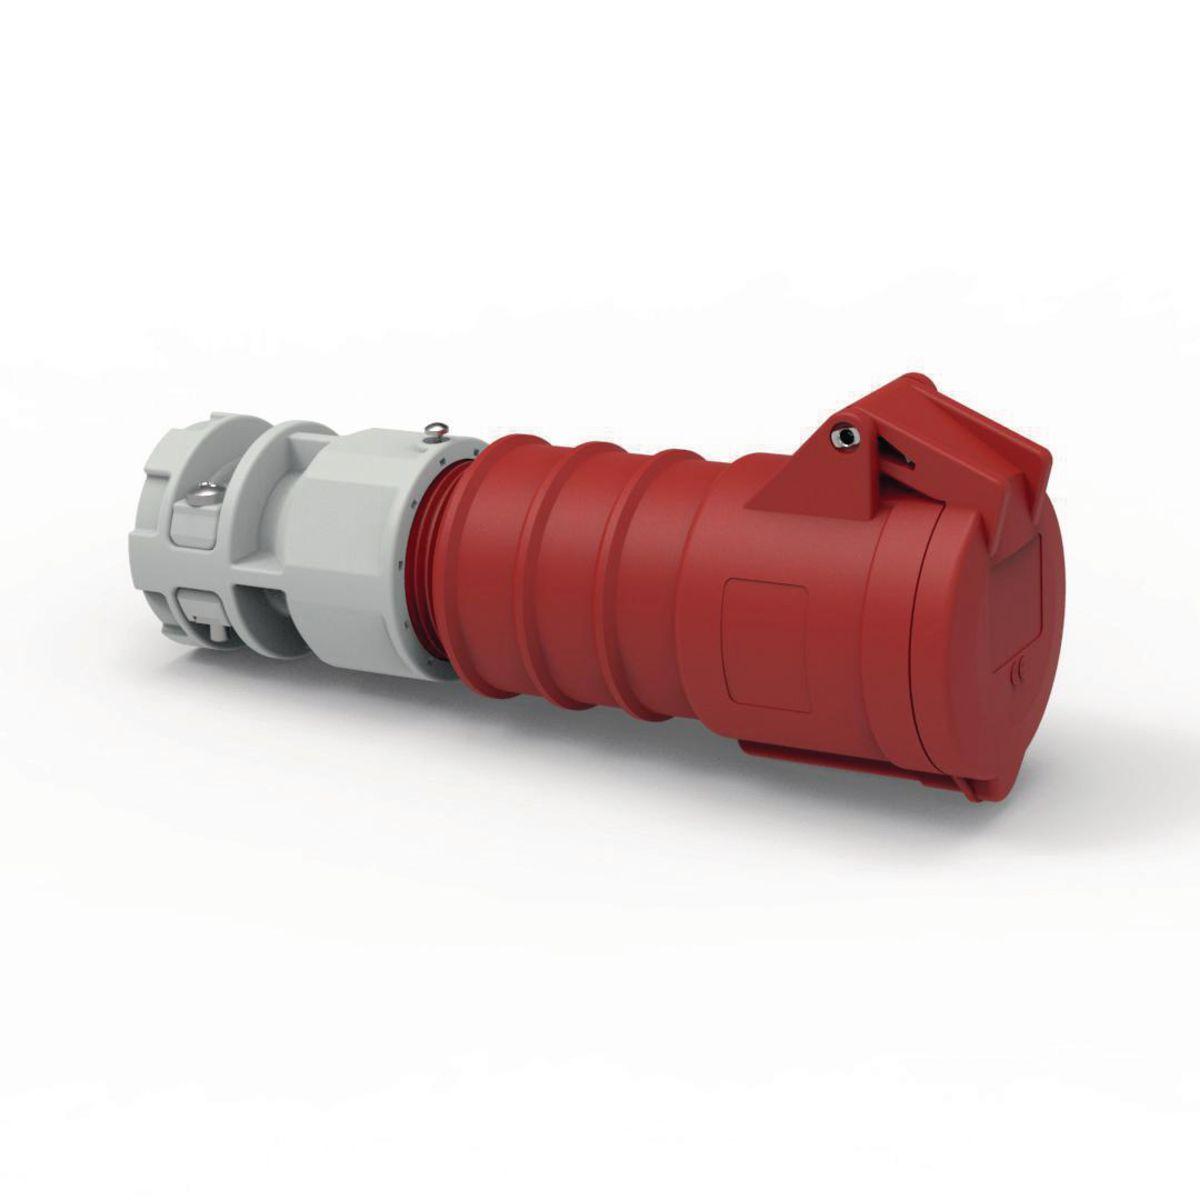 Hubbell C330C7SA Heavy Duty Products, IEC Pin and Sleeve Devices, Hubbell-PRO, Female, Connector Body, 30 A 480 VAC, 2-POLE 3-WIRE, Red, Splash Proof  ; IP44 environmental ratings ; Impact and corrosion resistant insulated non-metallic housing ; Sequential contact engagem